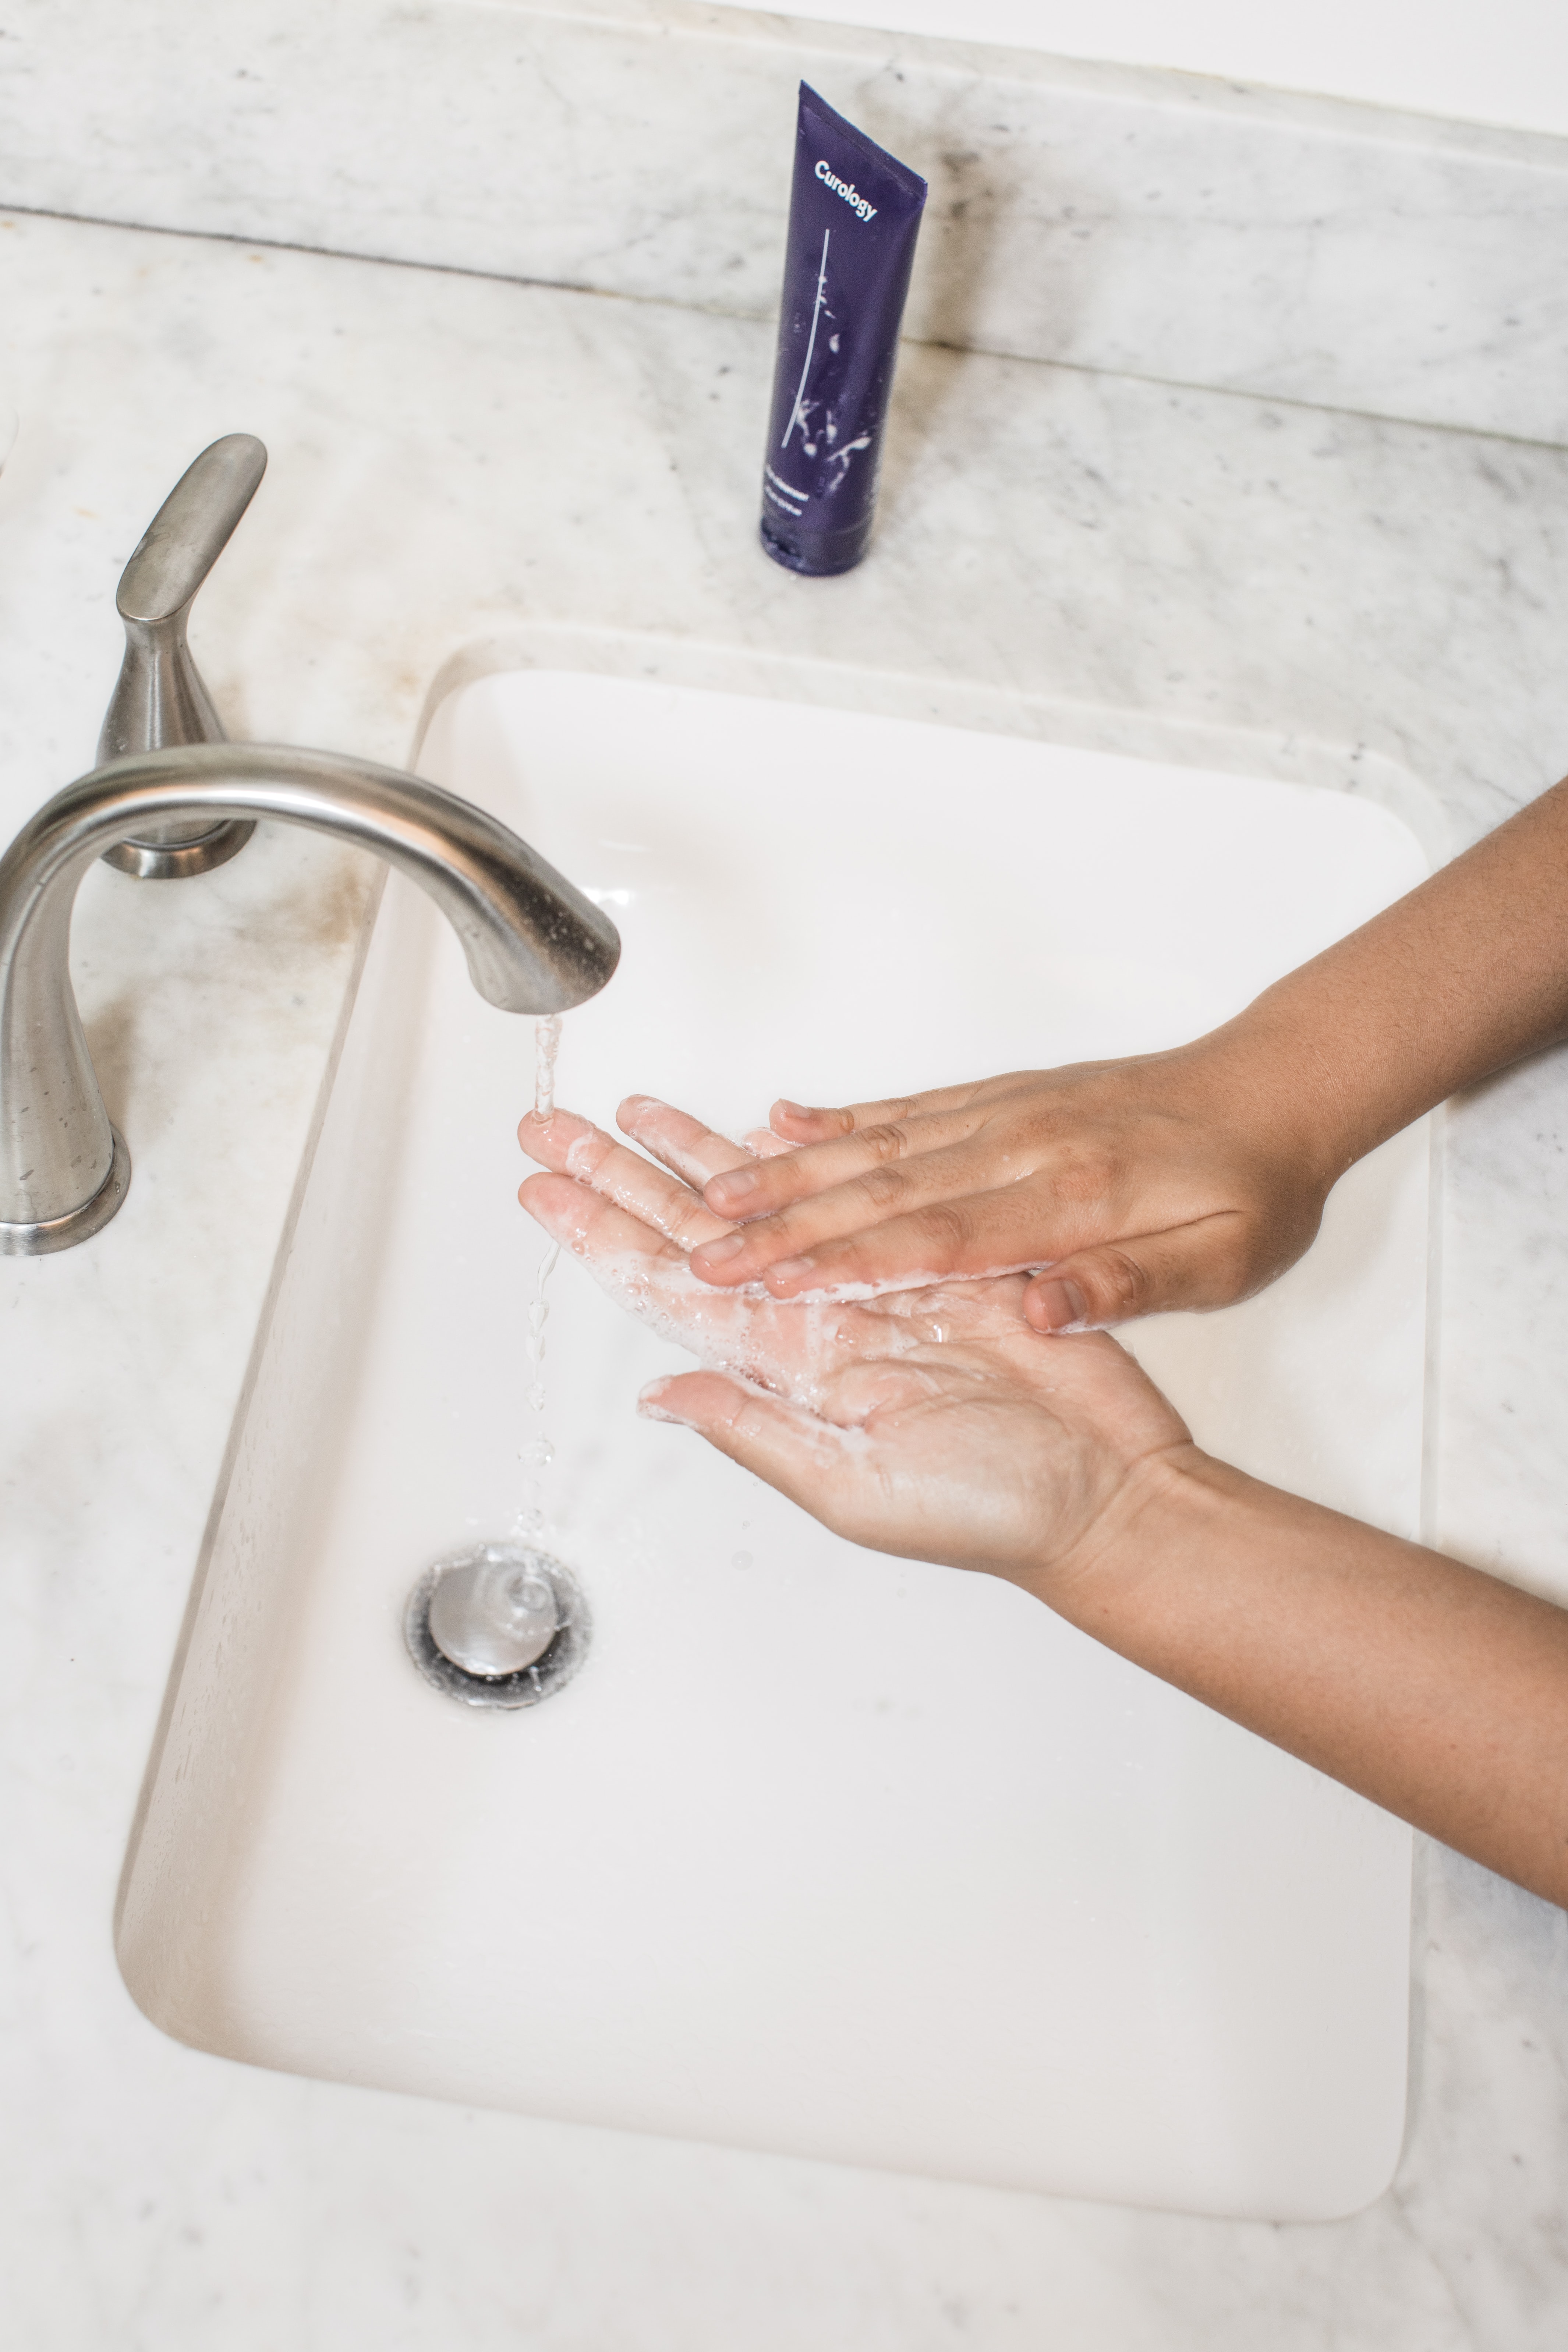 Washing hands both before and after handling chickens can help stop the spread of diseases.